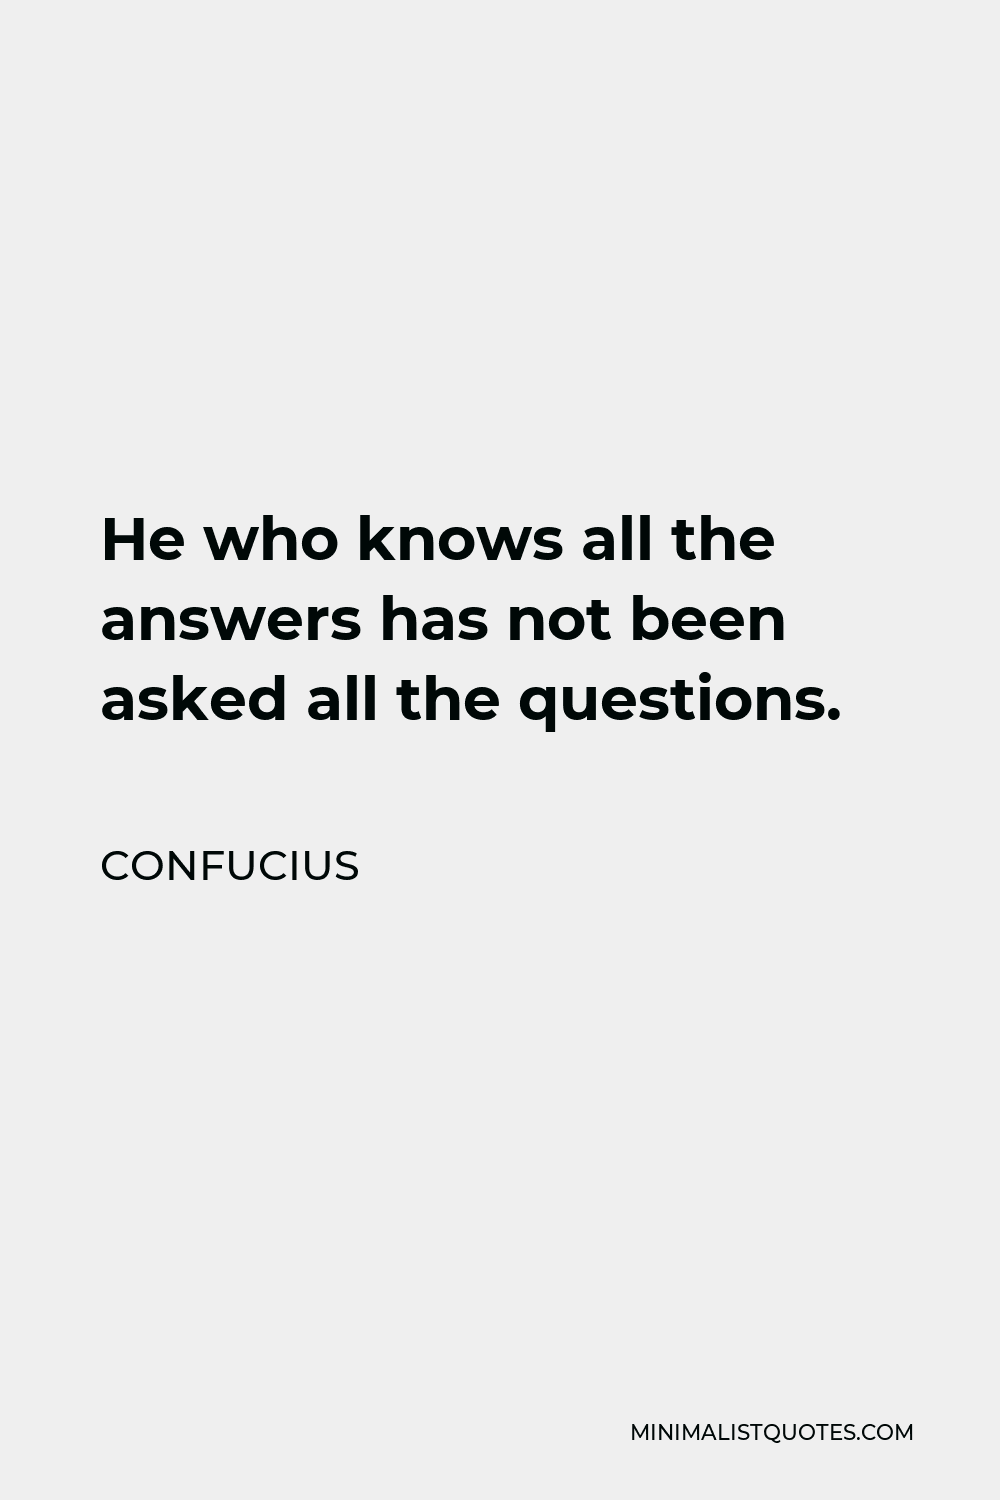 Confucius Quote - He who knows all the answers has not been asked all the questions.